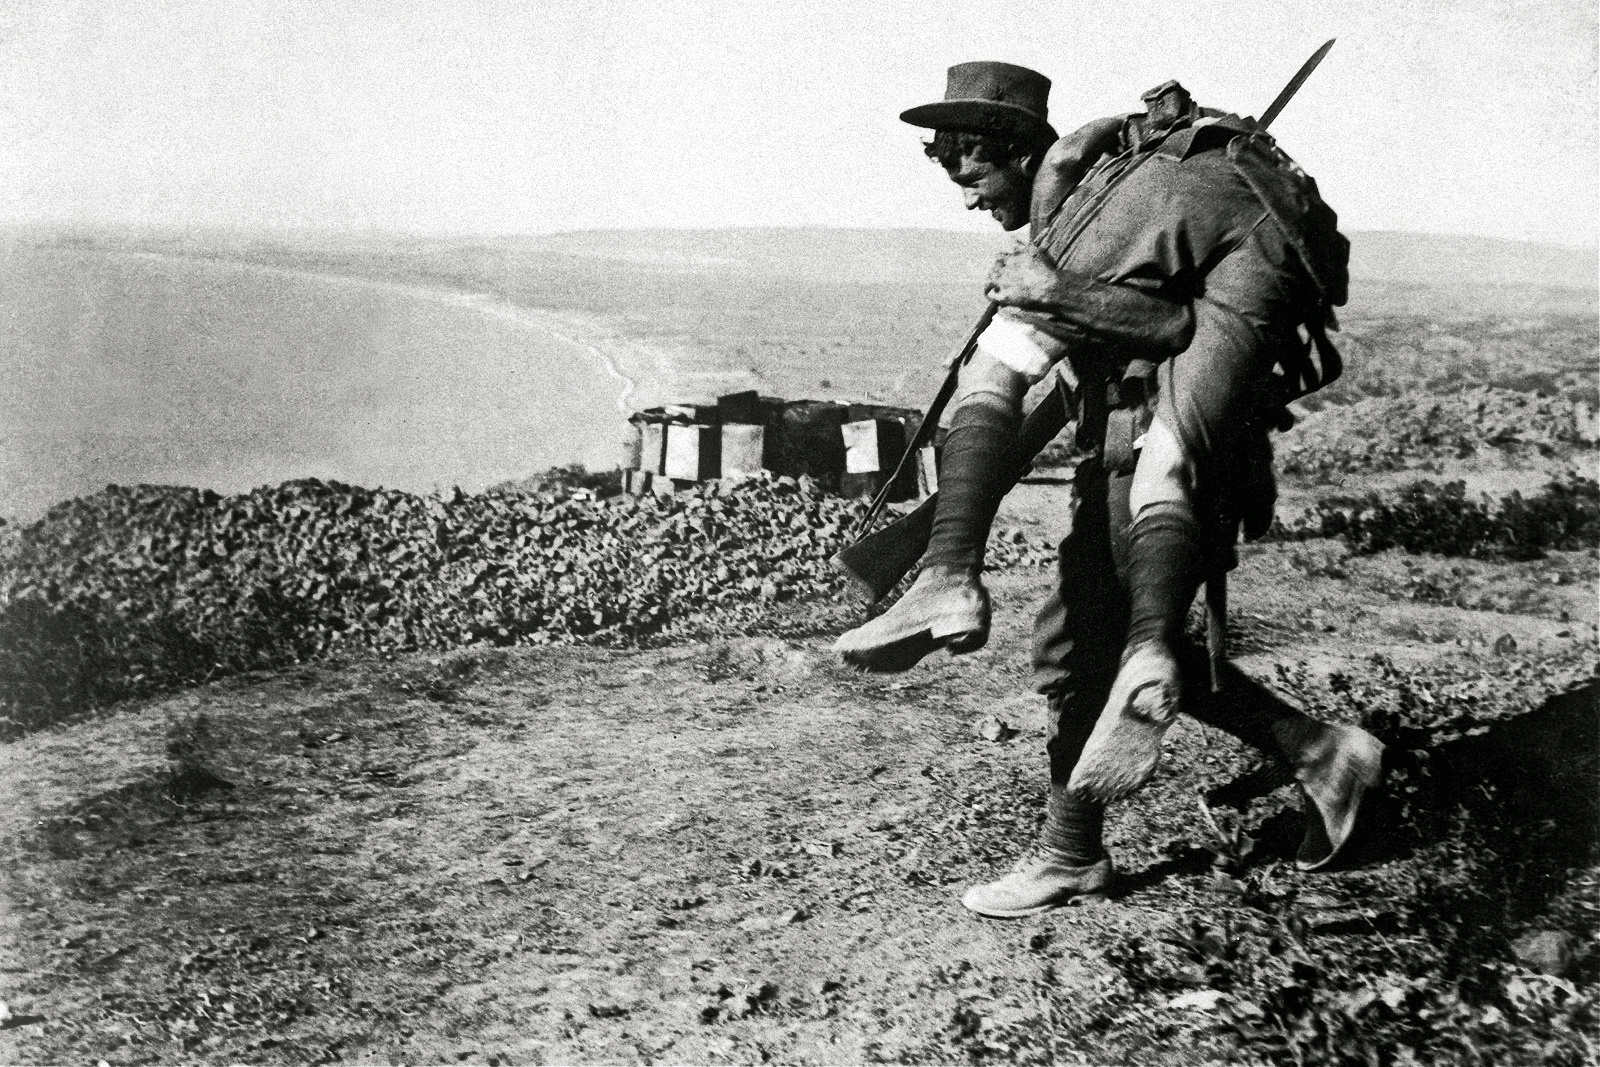 An Australian soldier carrying a wounded comrade during the Dardanelles Campaign in 1915